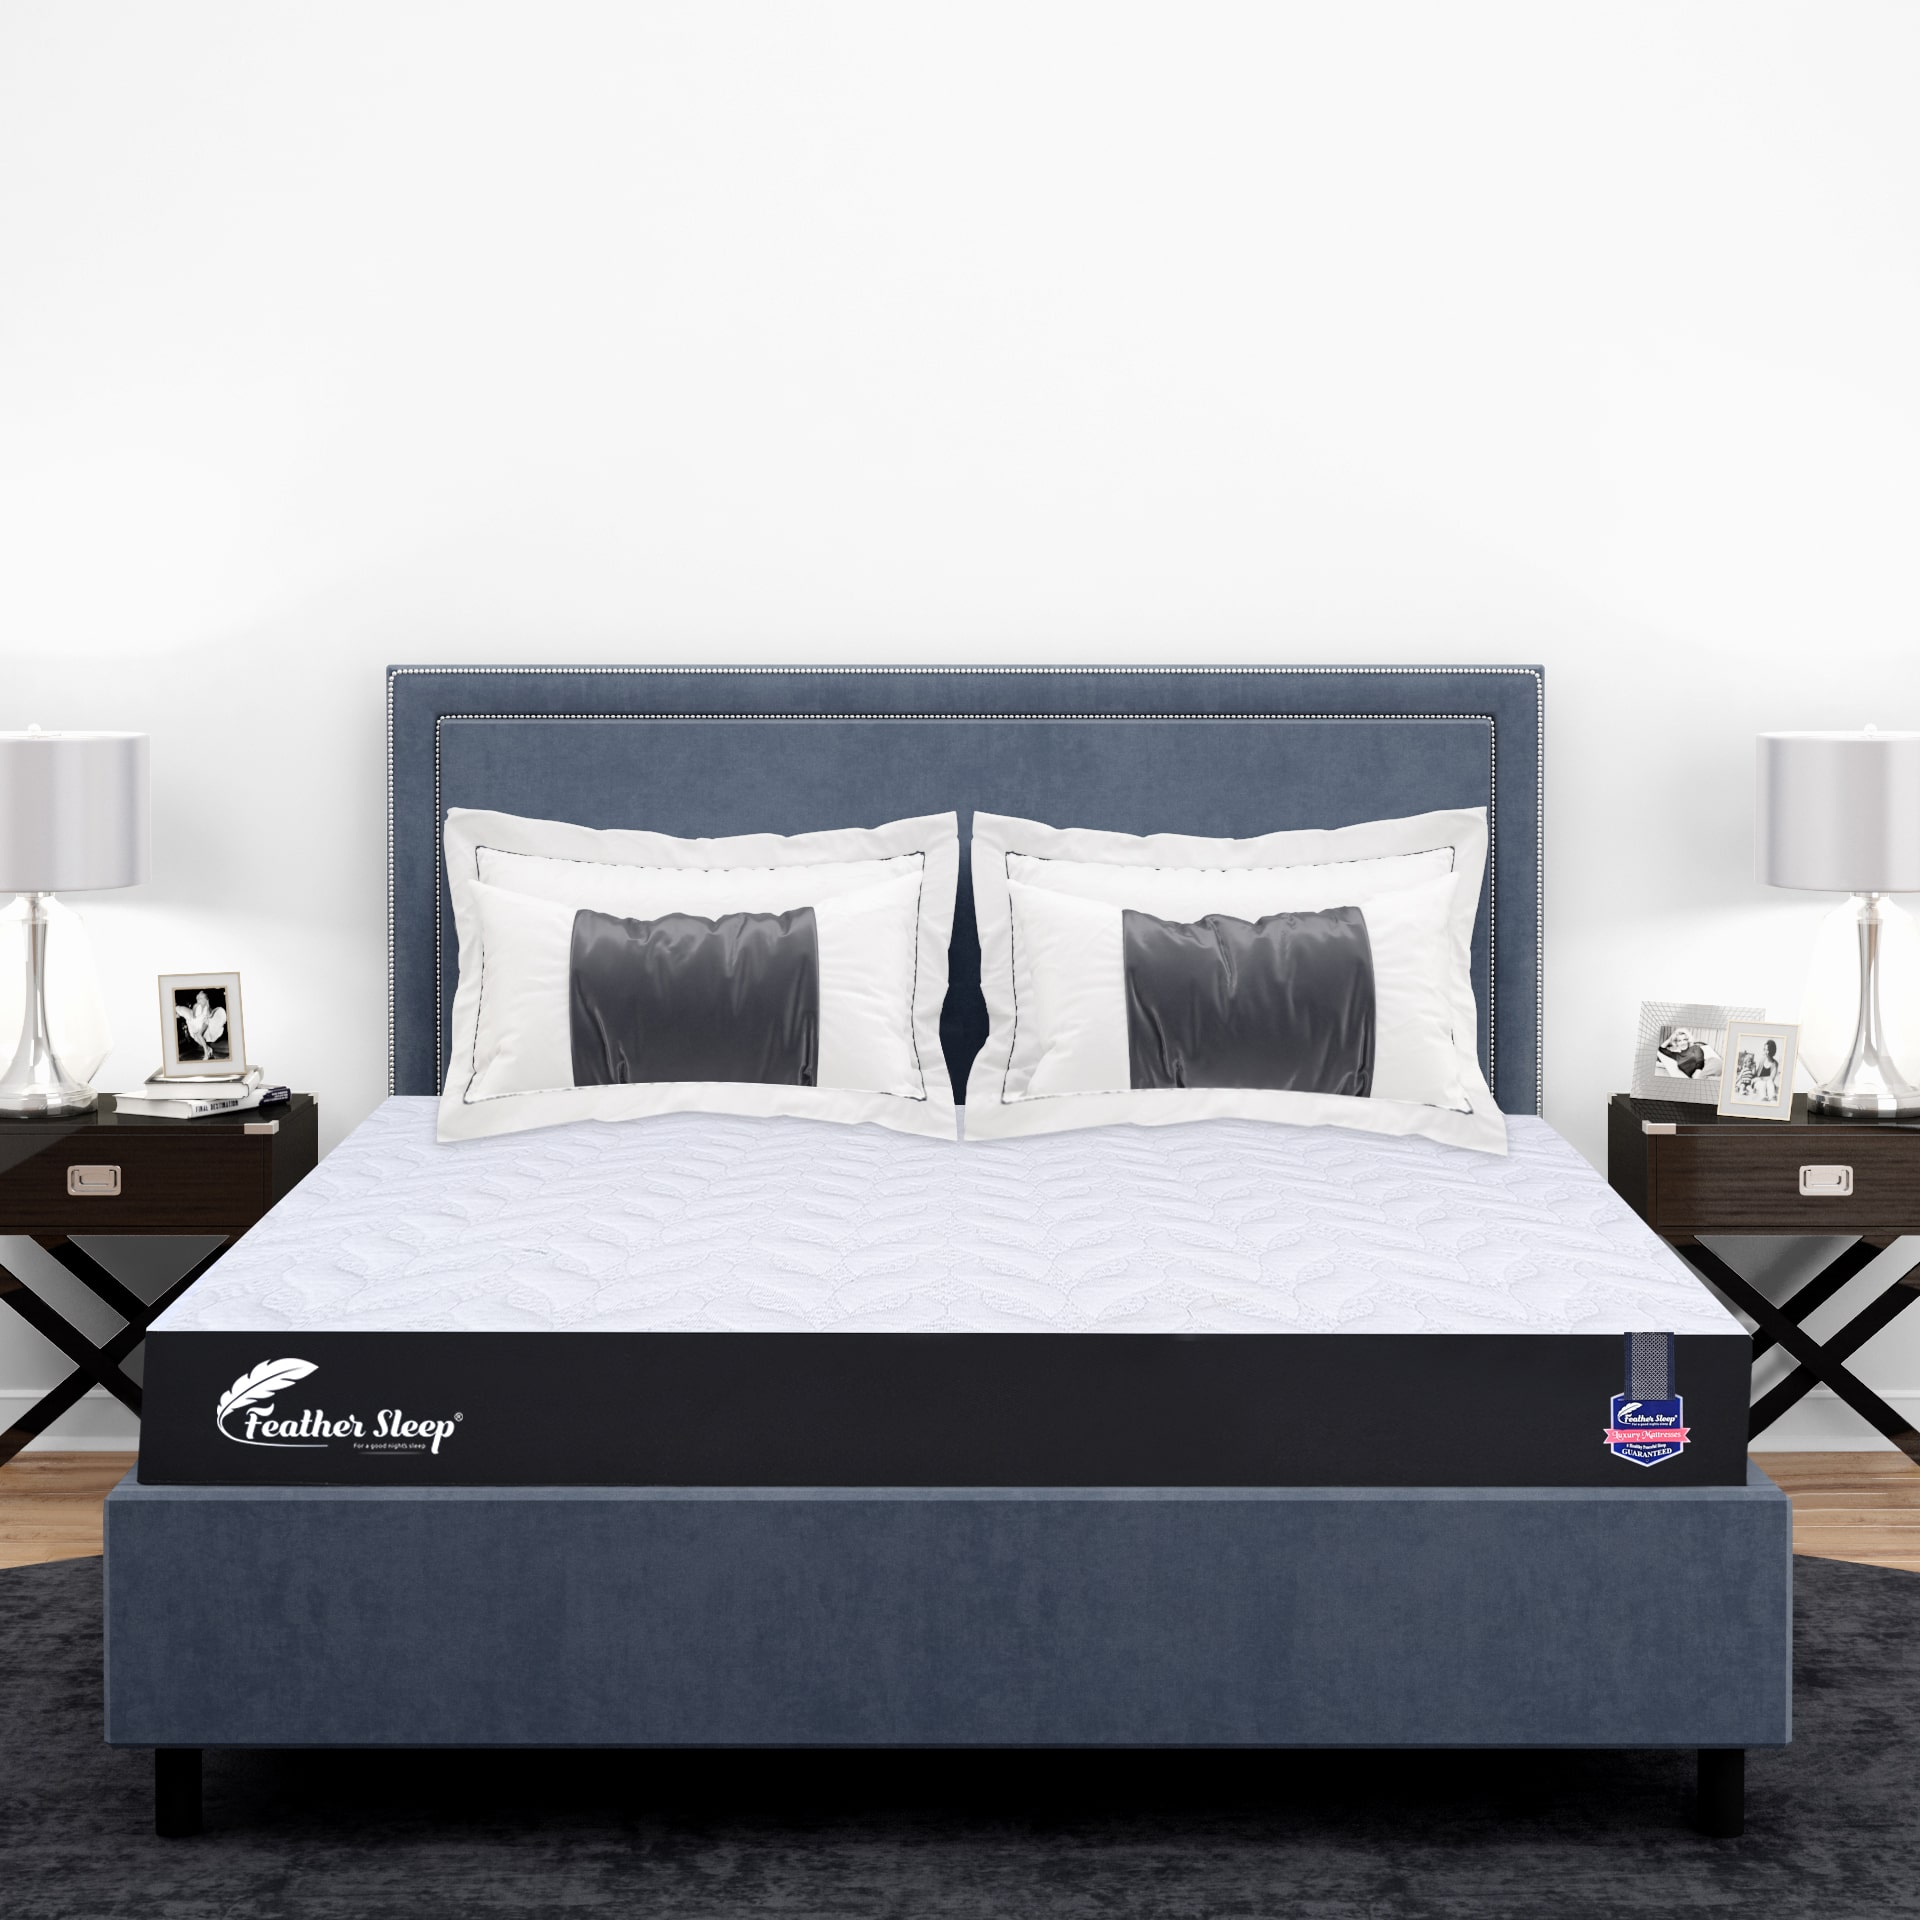 Feather Sleep Sleepy up Orthopedic Mattress Charcoal Dual Side Hard and Soft 3- Layer High Density Softy & Topper+Responsive Charcoal+High Resilience Foam